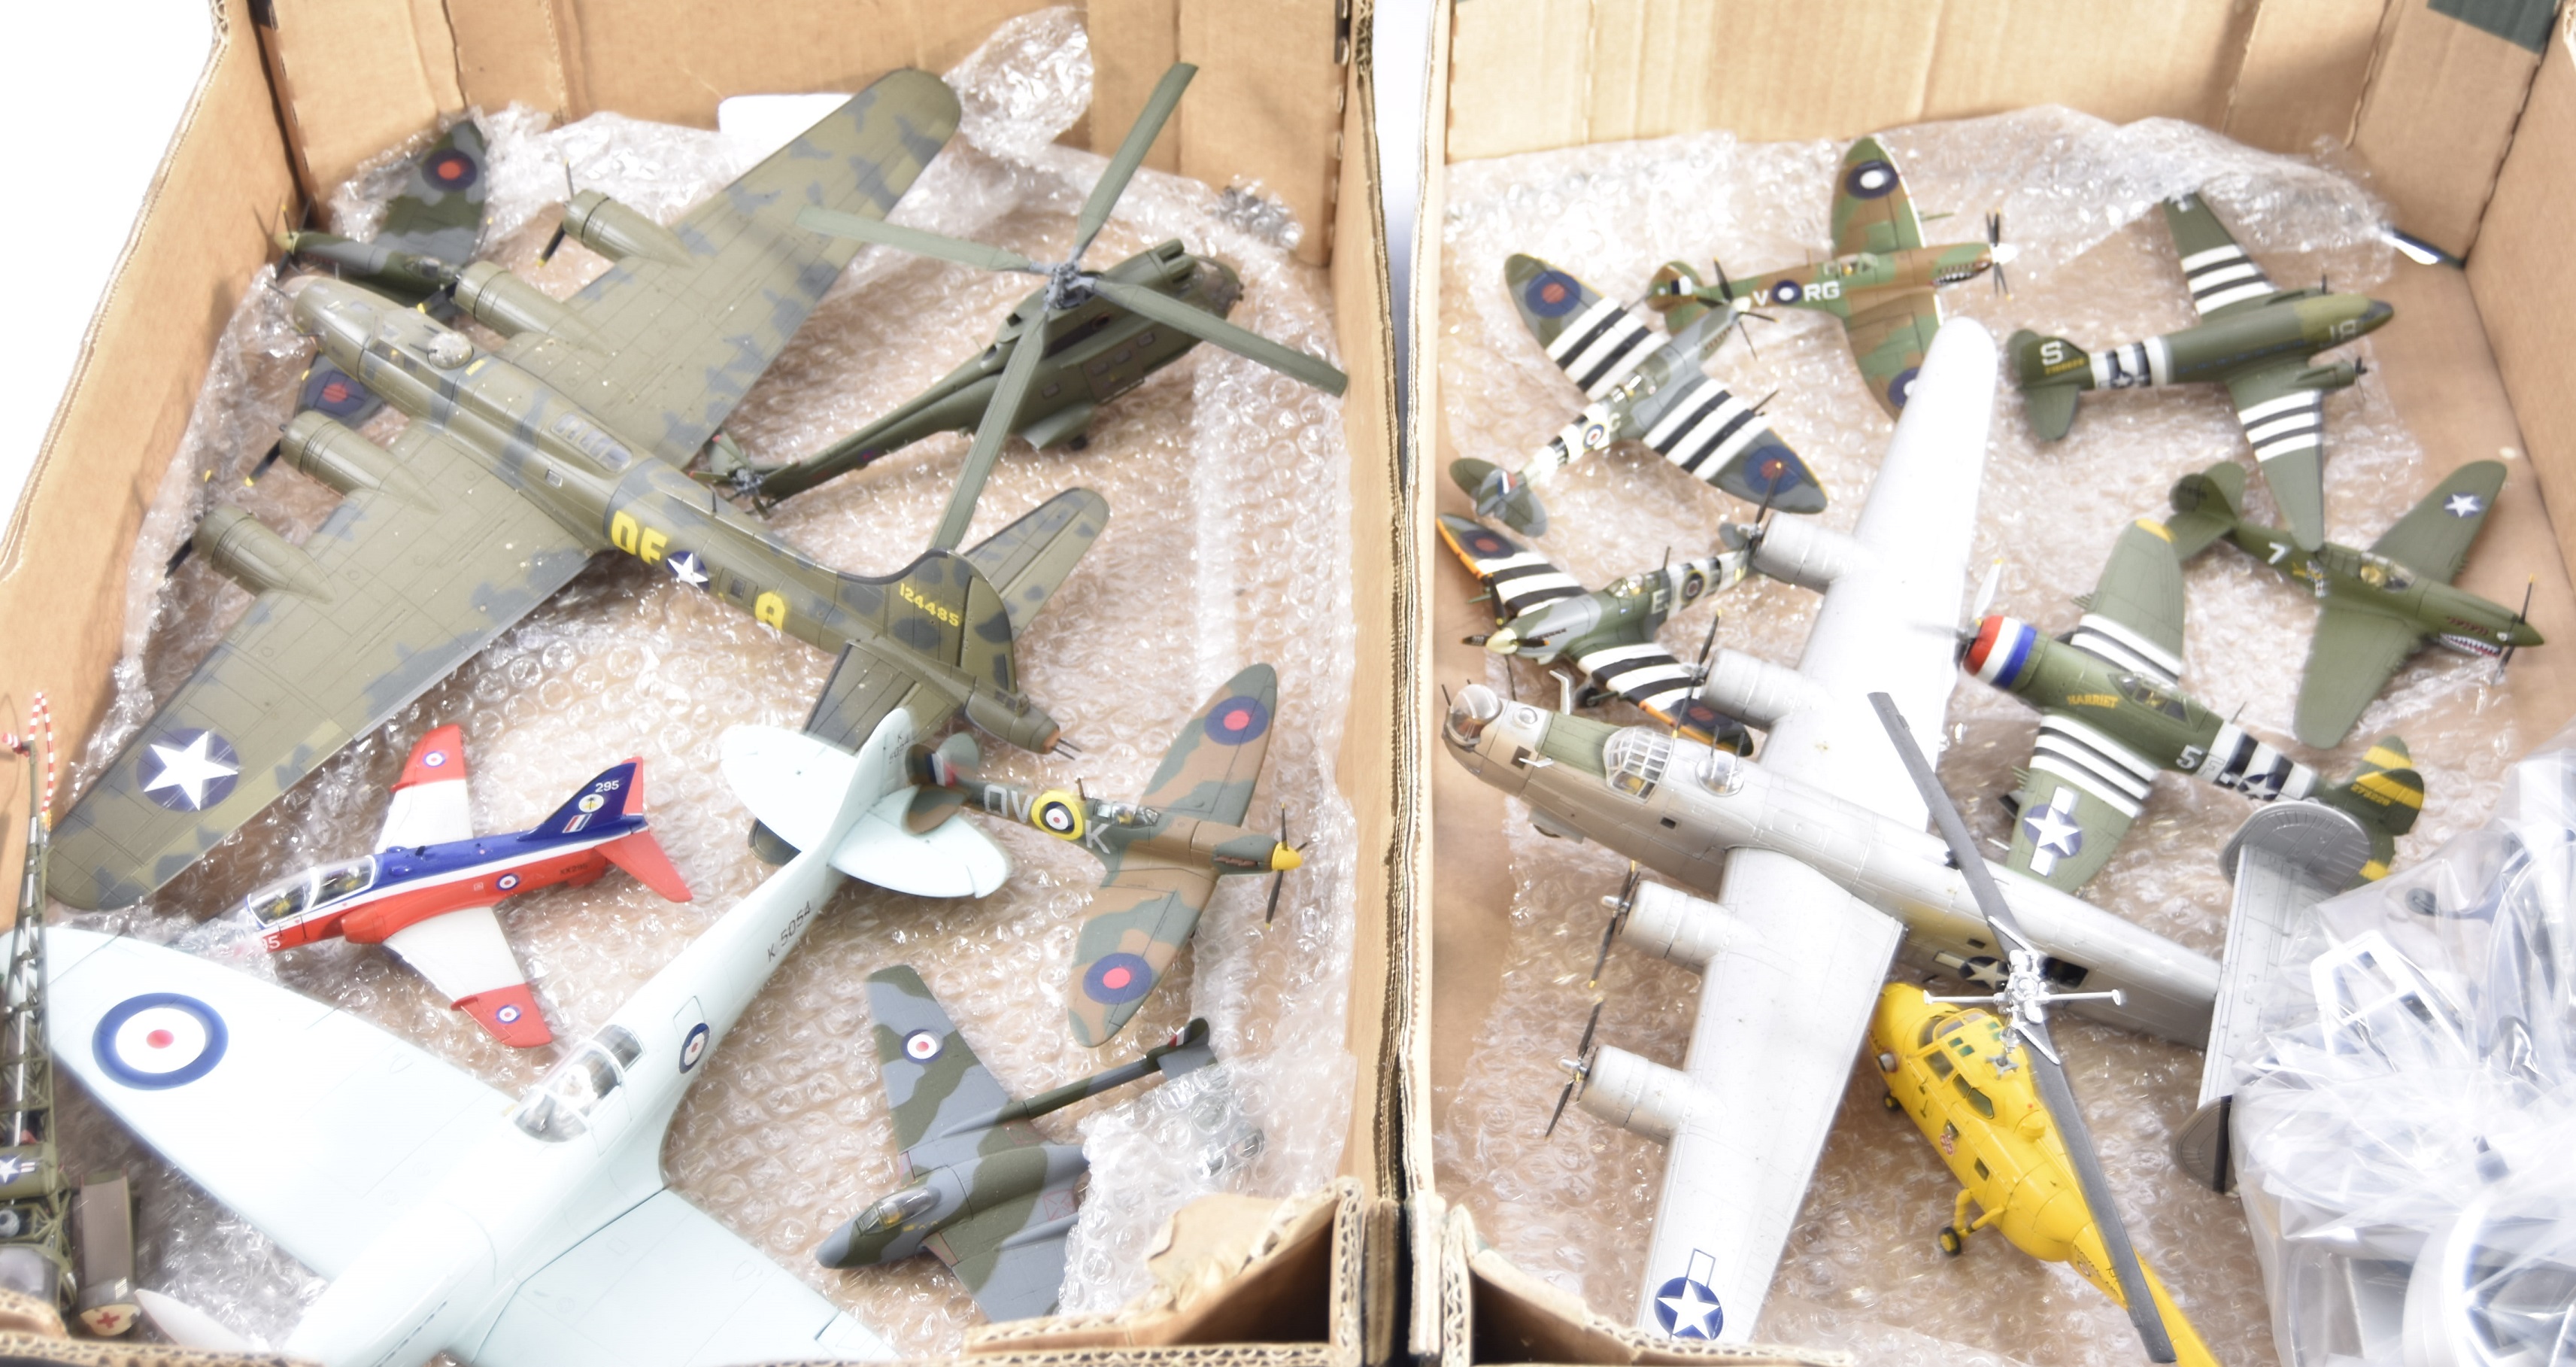 Corgi Aviation Archive, sixteen loose WWII and later military aircraft models, with some stands